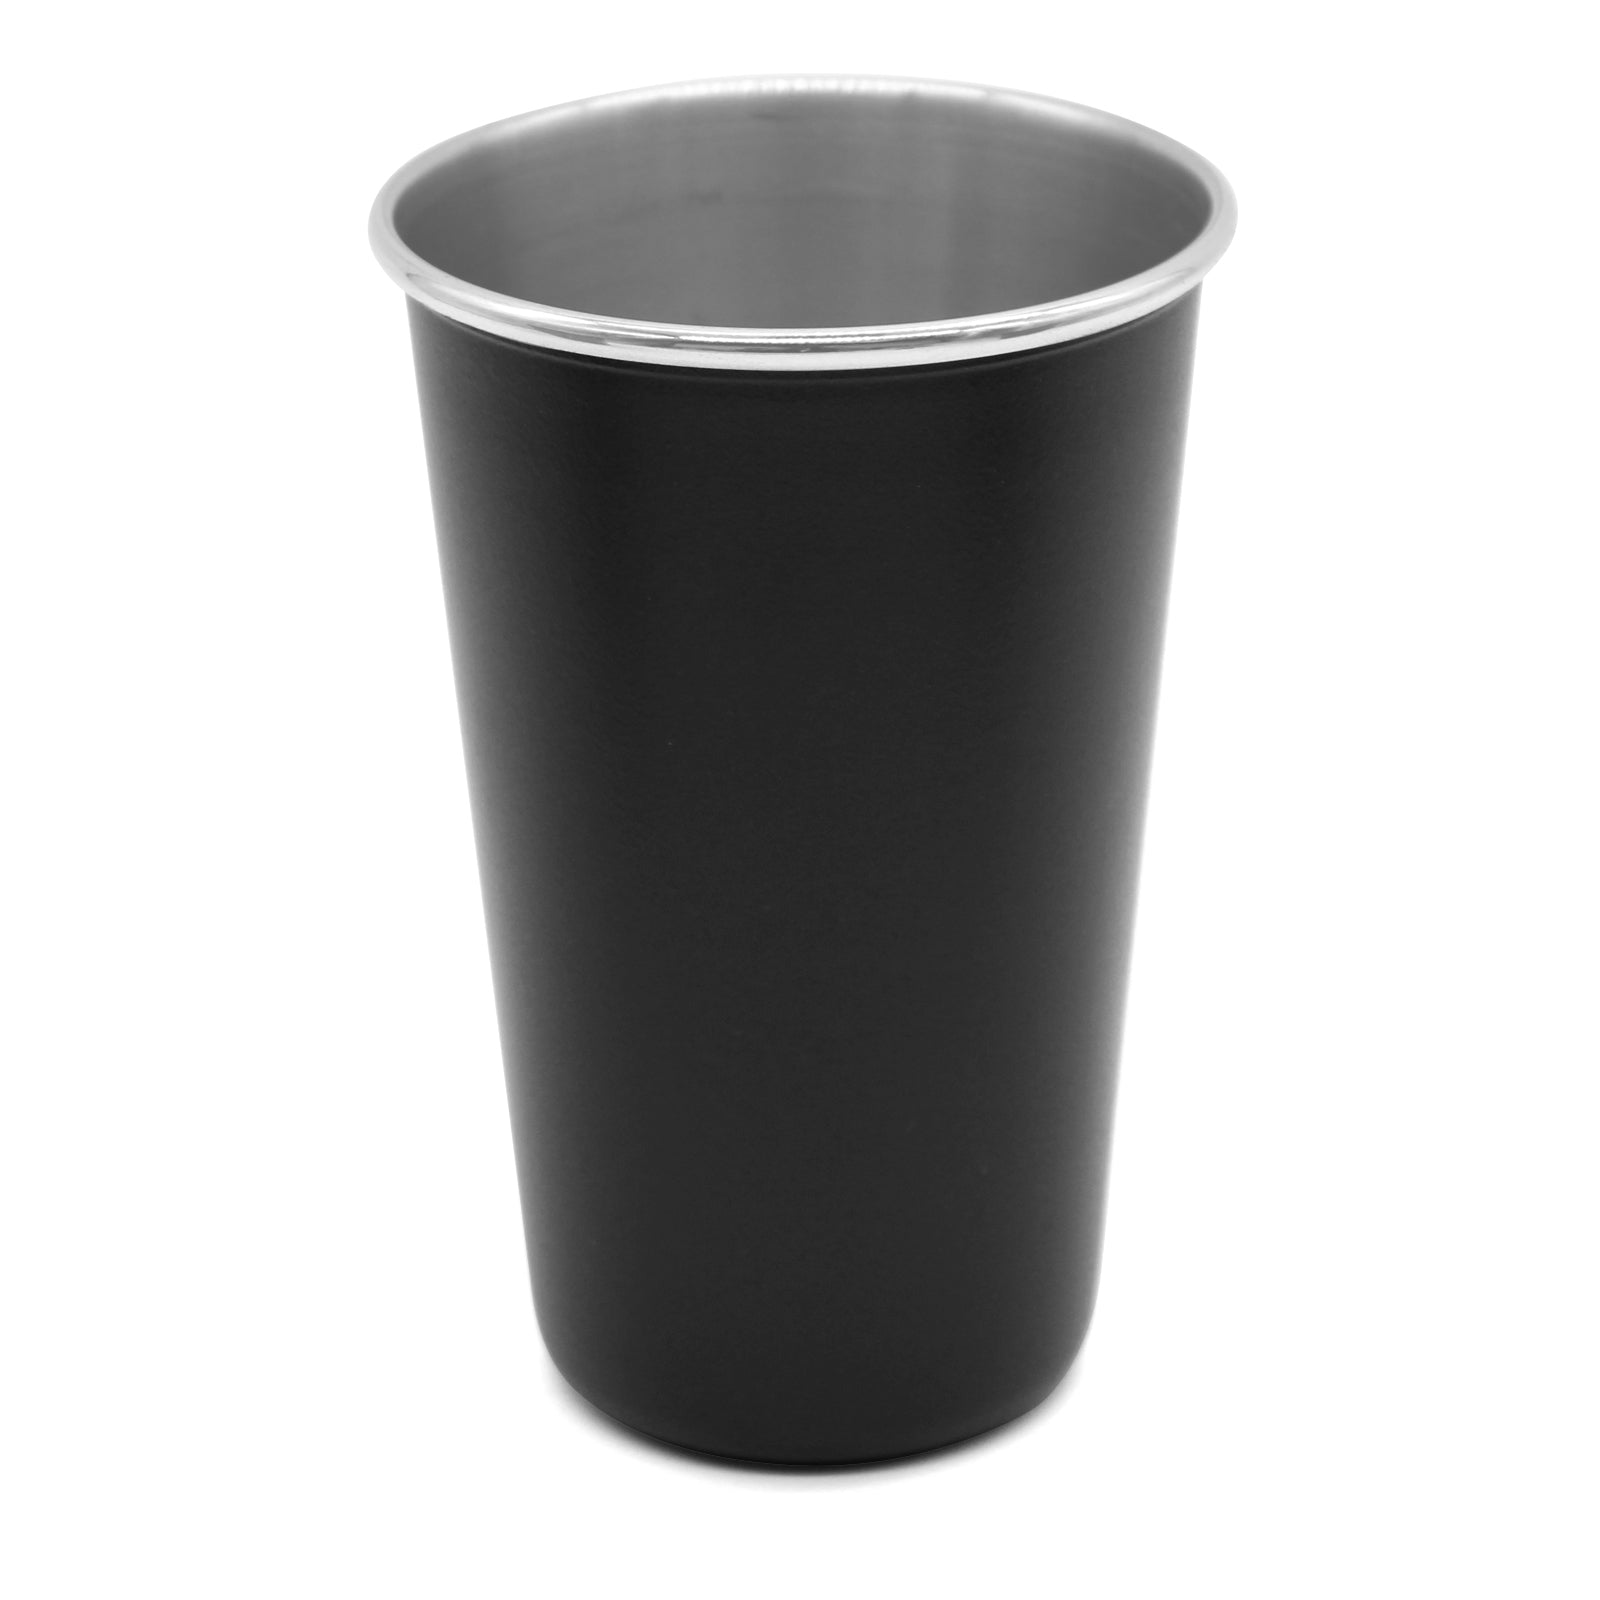 Stainless Steel Black Tumbler Cup for Camping and Fishing